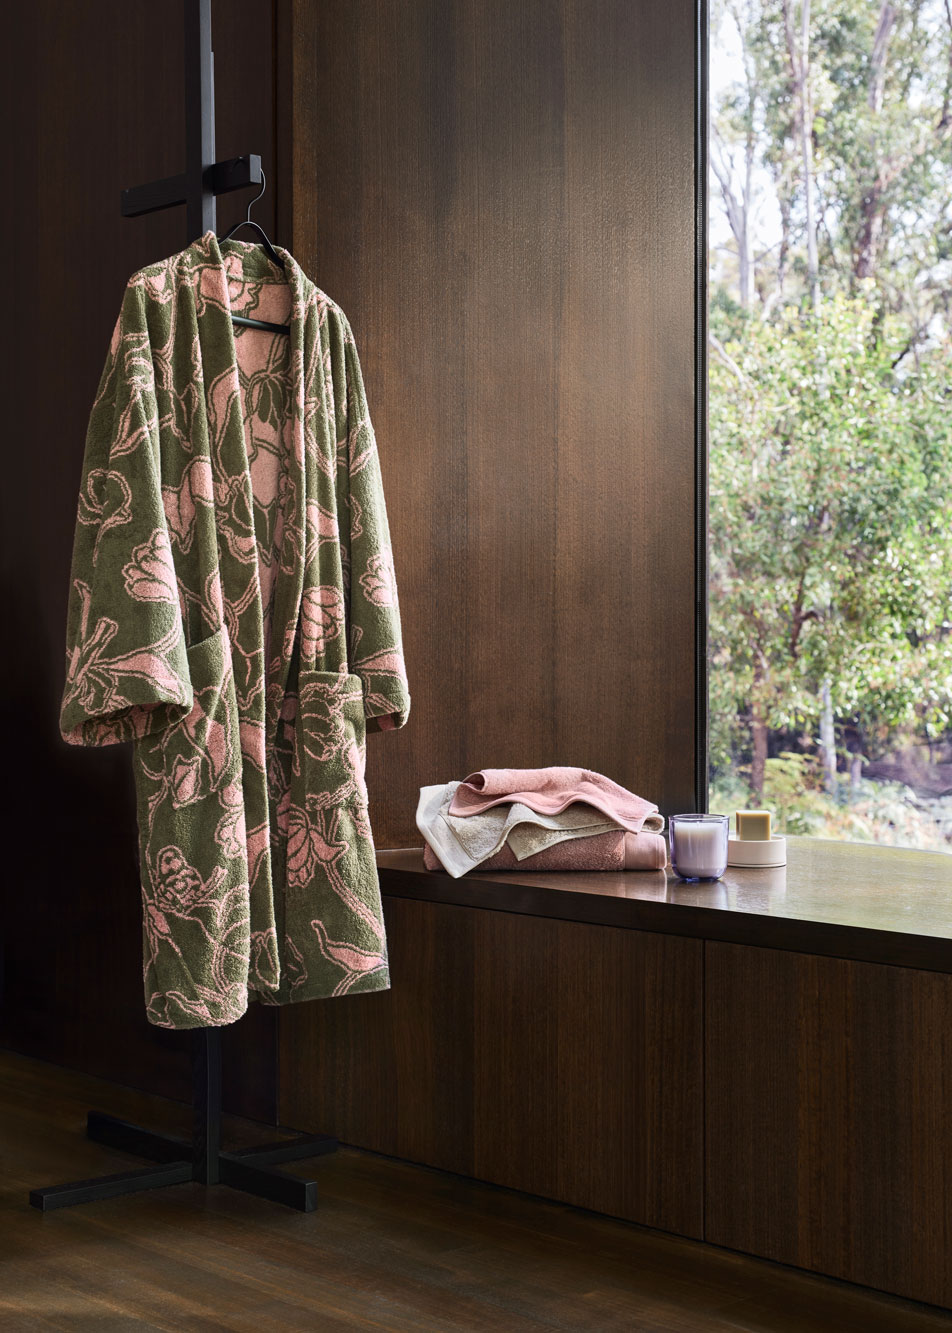 A bath robe hanging on a hook in a modern timber bathroom. Next to it is a window sill with a stack of towels and a candle sitting on top.